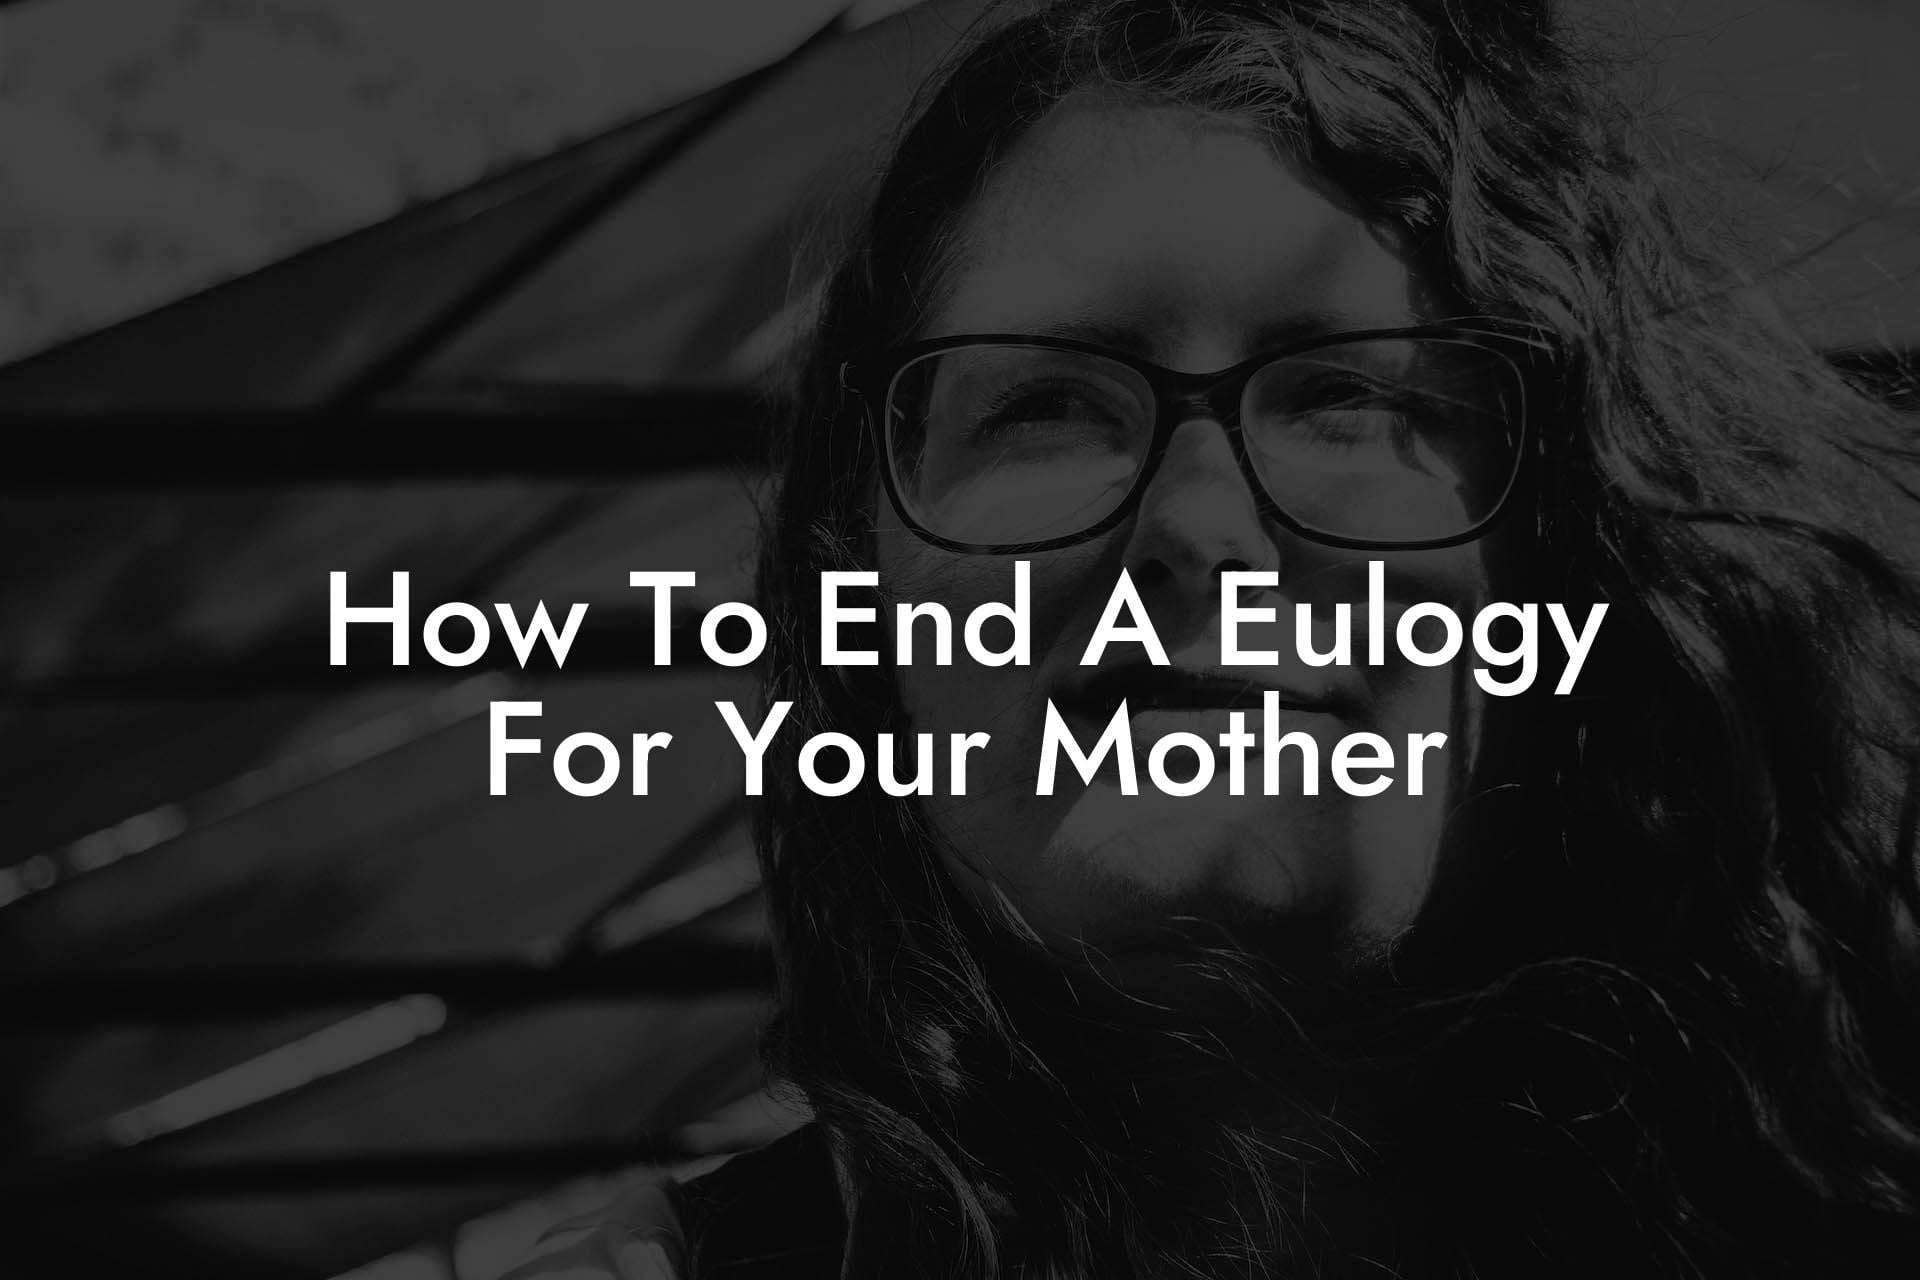 How To End A Eulogy For Your Mother